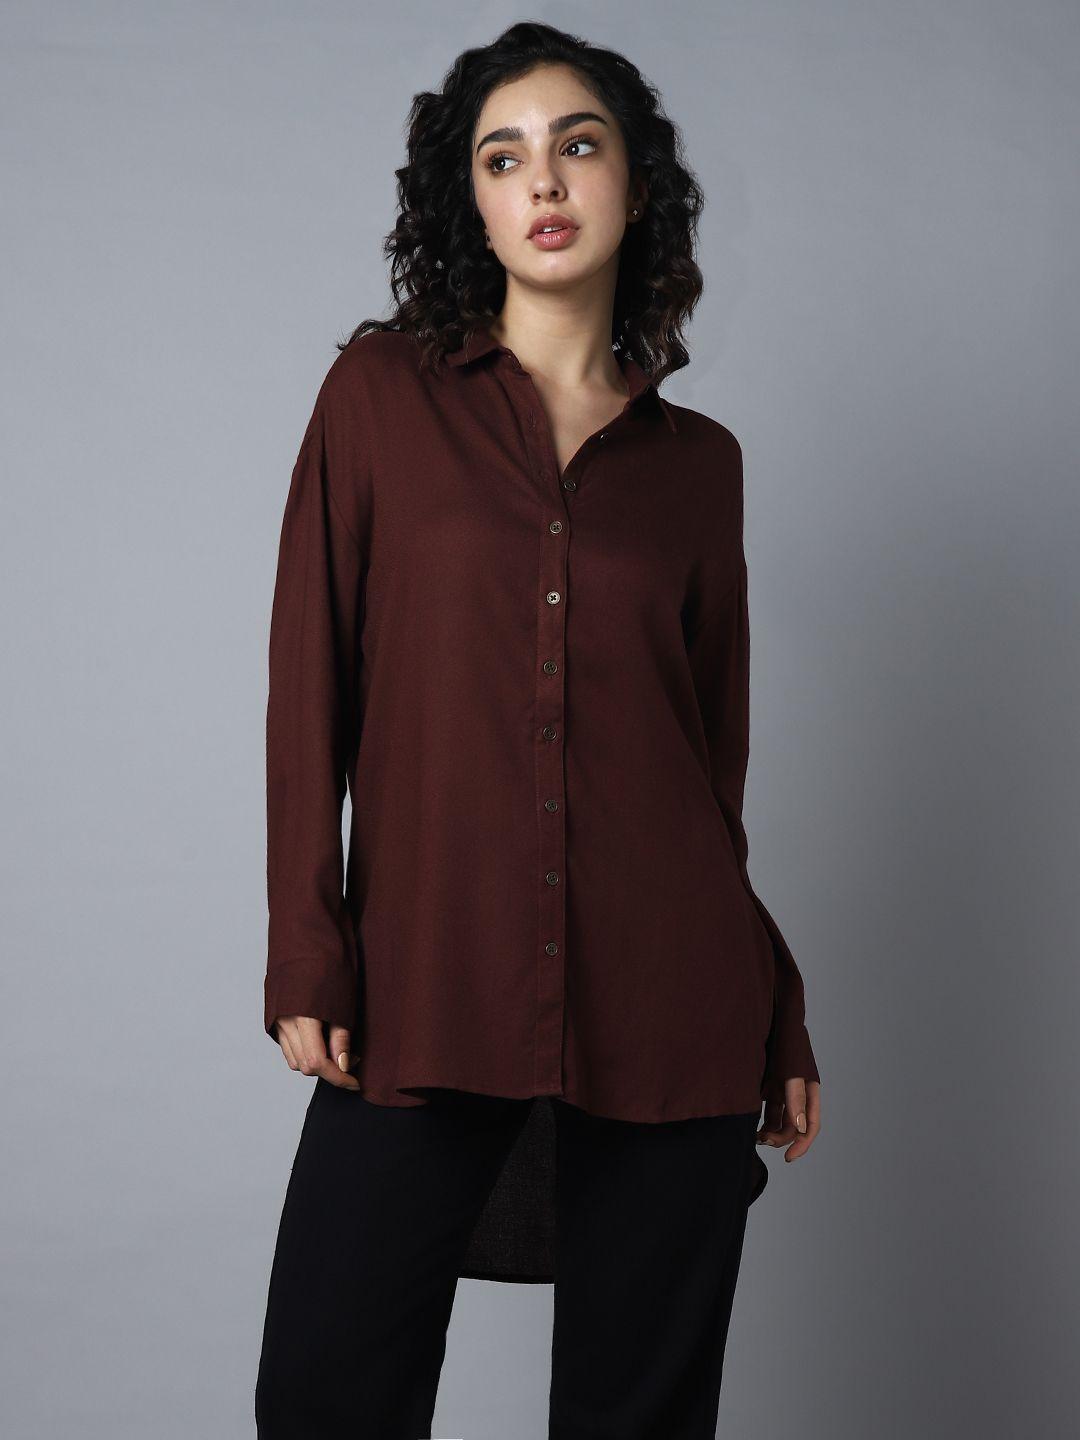 high-star-classic-oversized-spread-collar-long-sleeves-casual-shirt